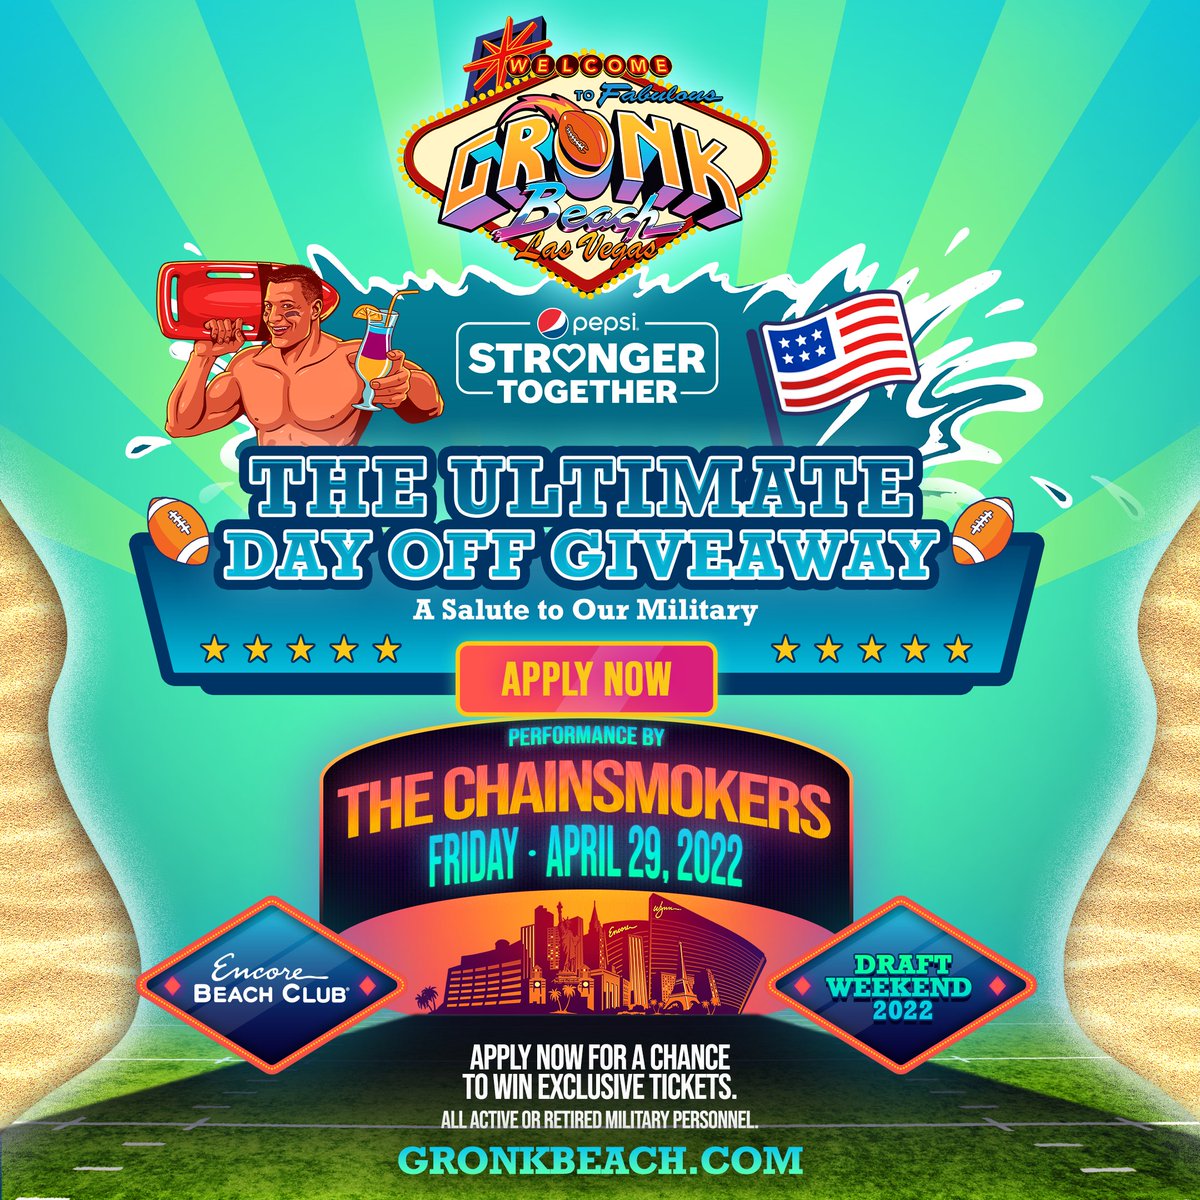 🇺🇸 We are proud to support “The Ultimate Day Off in Las Vegas Giveaway” as part of @GronkBeachLV on 4/29! Apply if you are active-duty U.S. military personnel, the U.S. military reserve, or a veteran for a chance to win @TheChainsmokers 🎟️ & get swag: bit.ly/3Jgxjsd